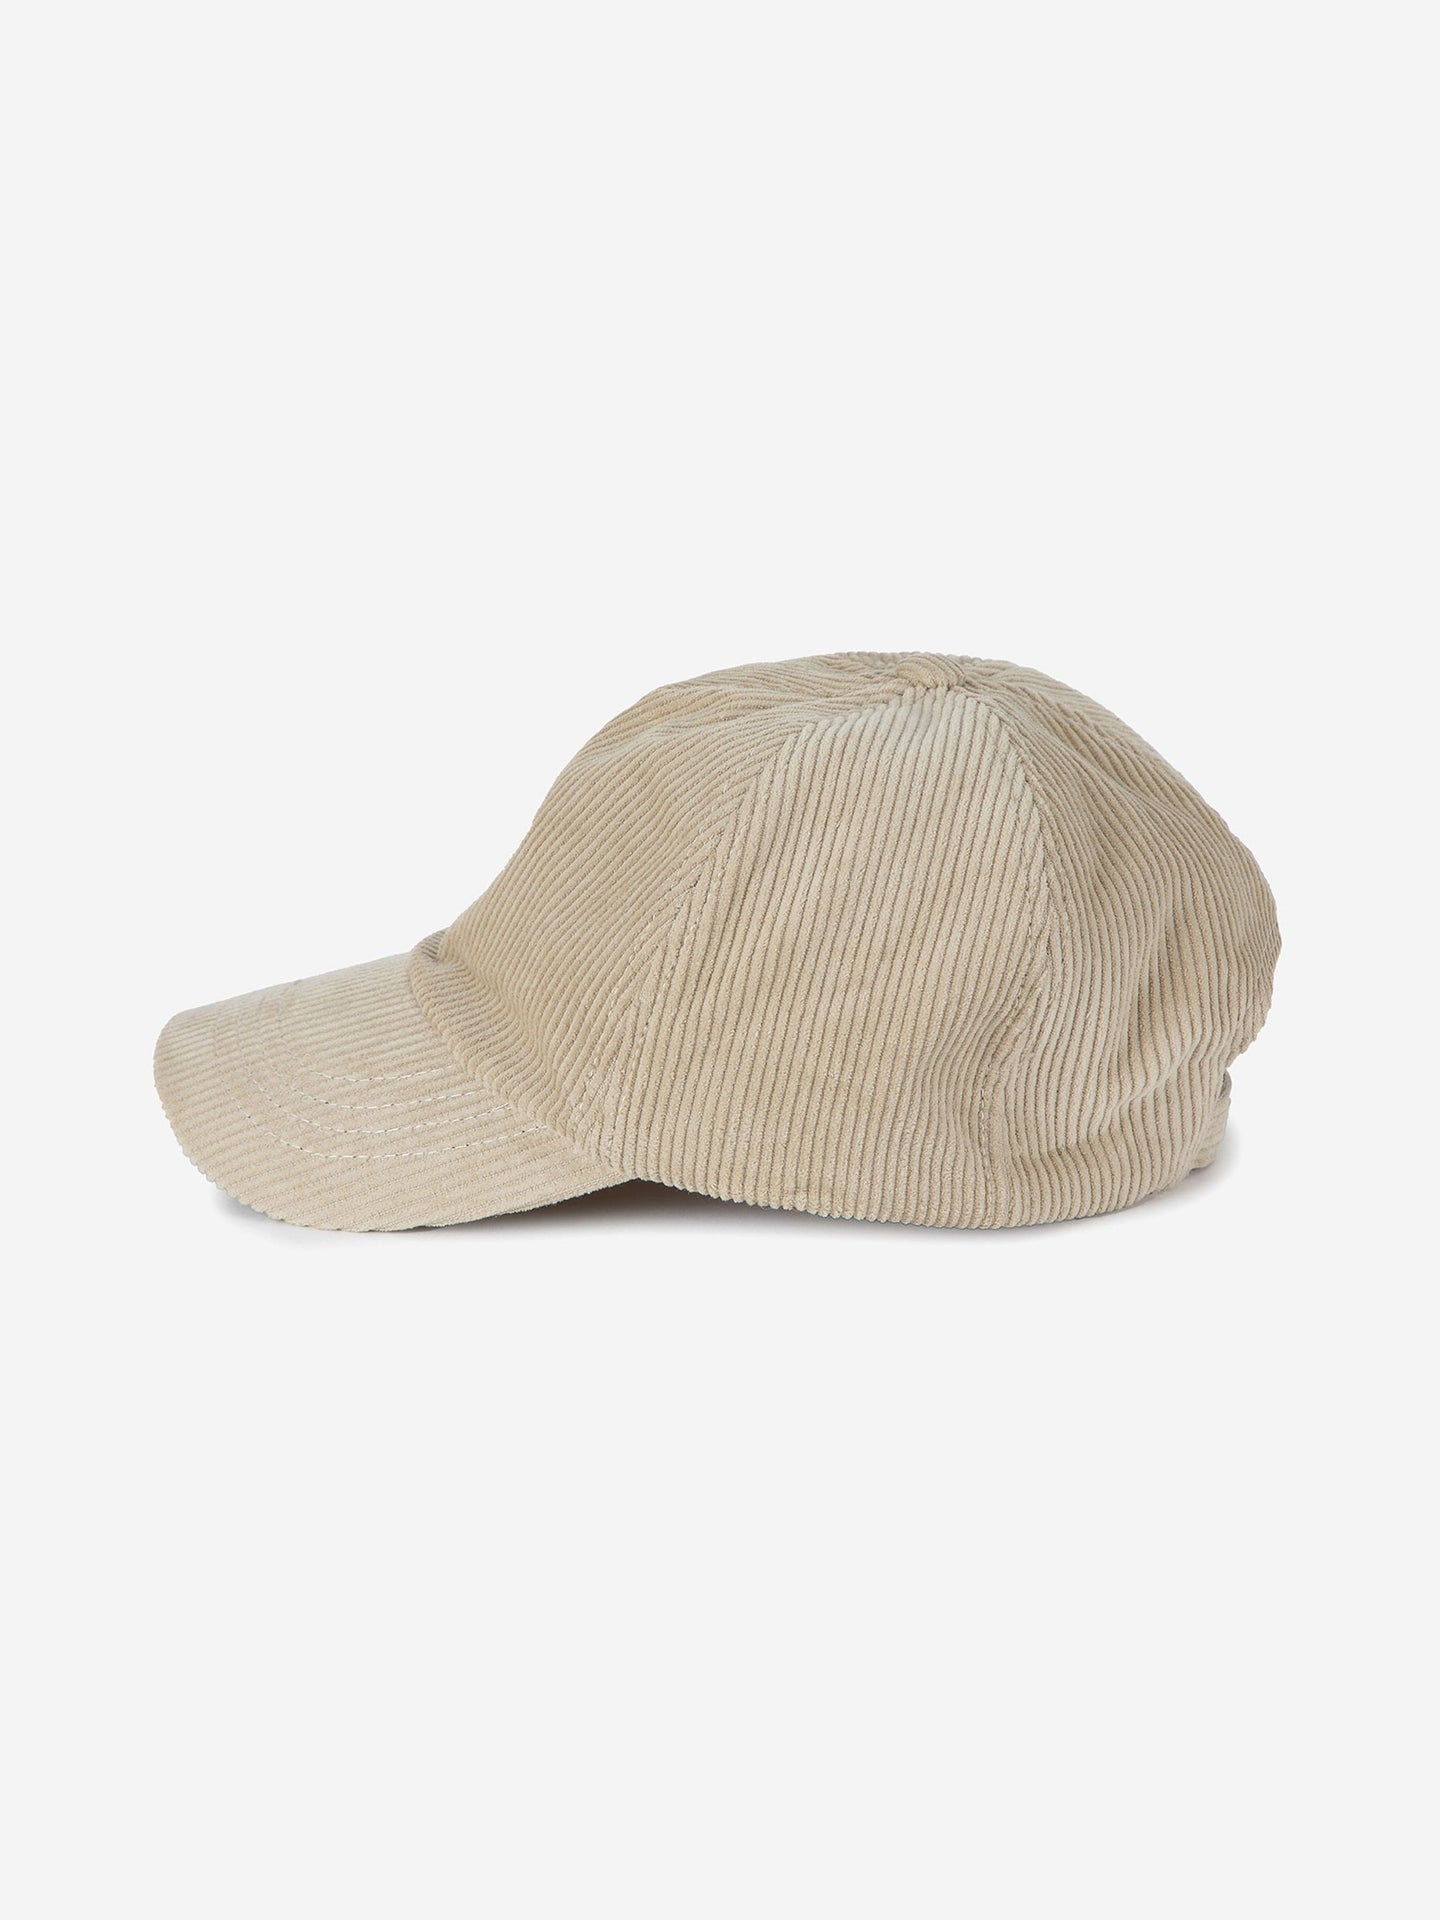 Hat Embroidered Co 223ak012 110